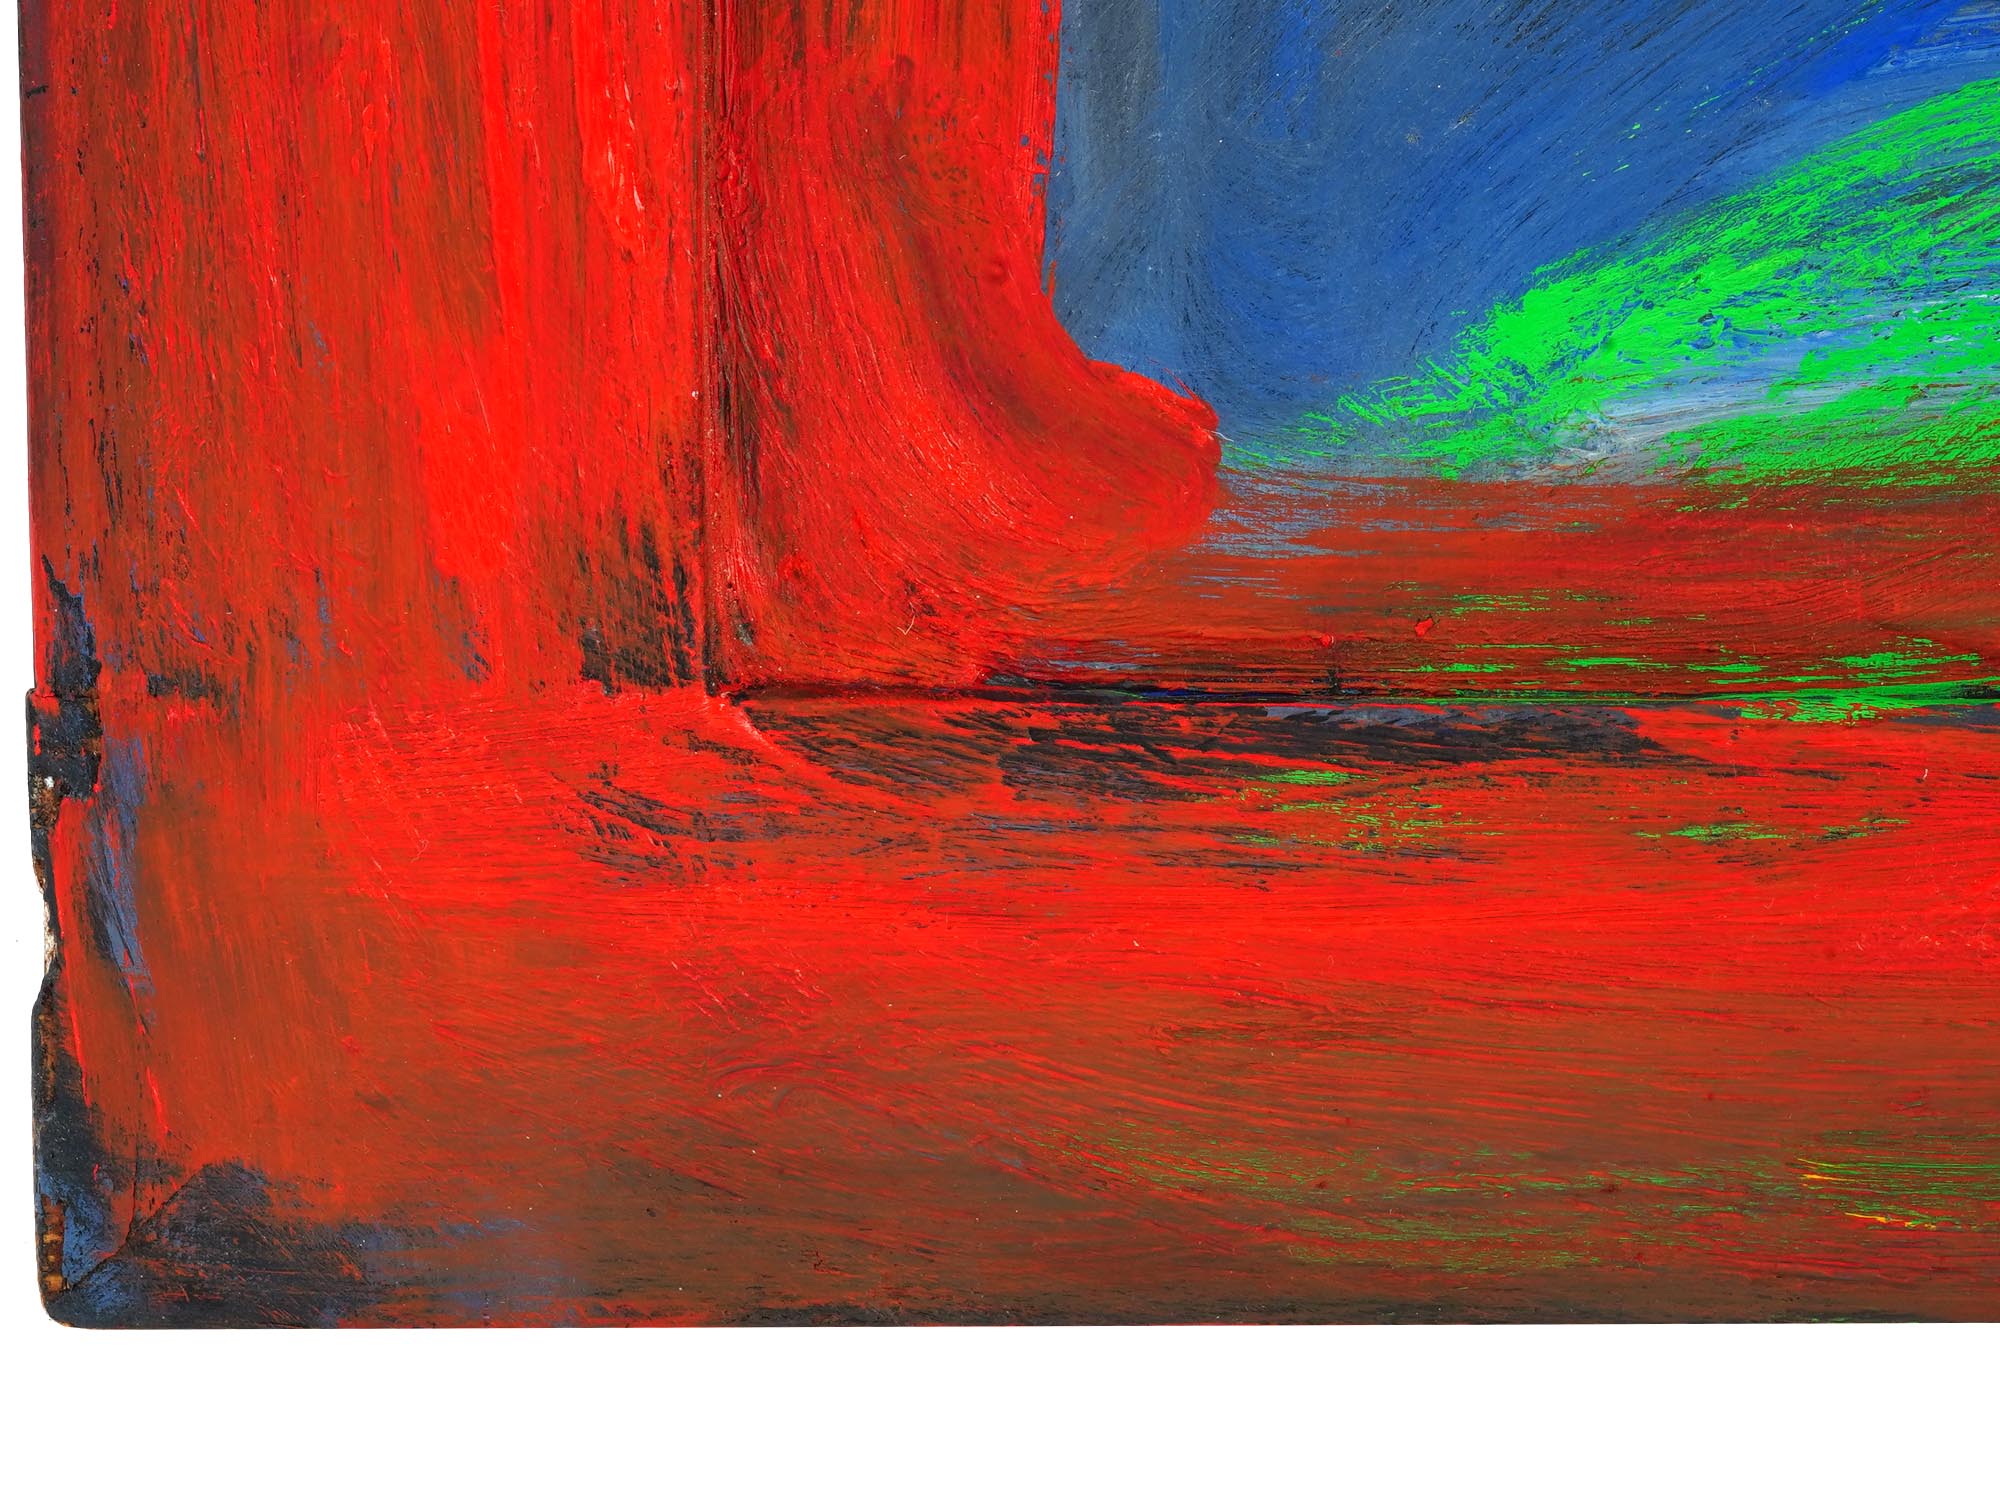 ABSTRACT BRITISH OIL PAINTING BY HOWARD HODGKIN PIC-3